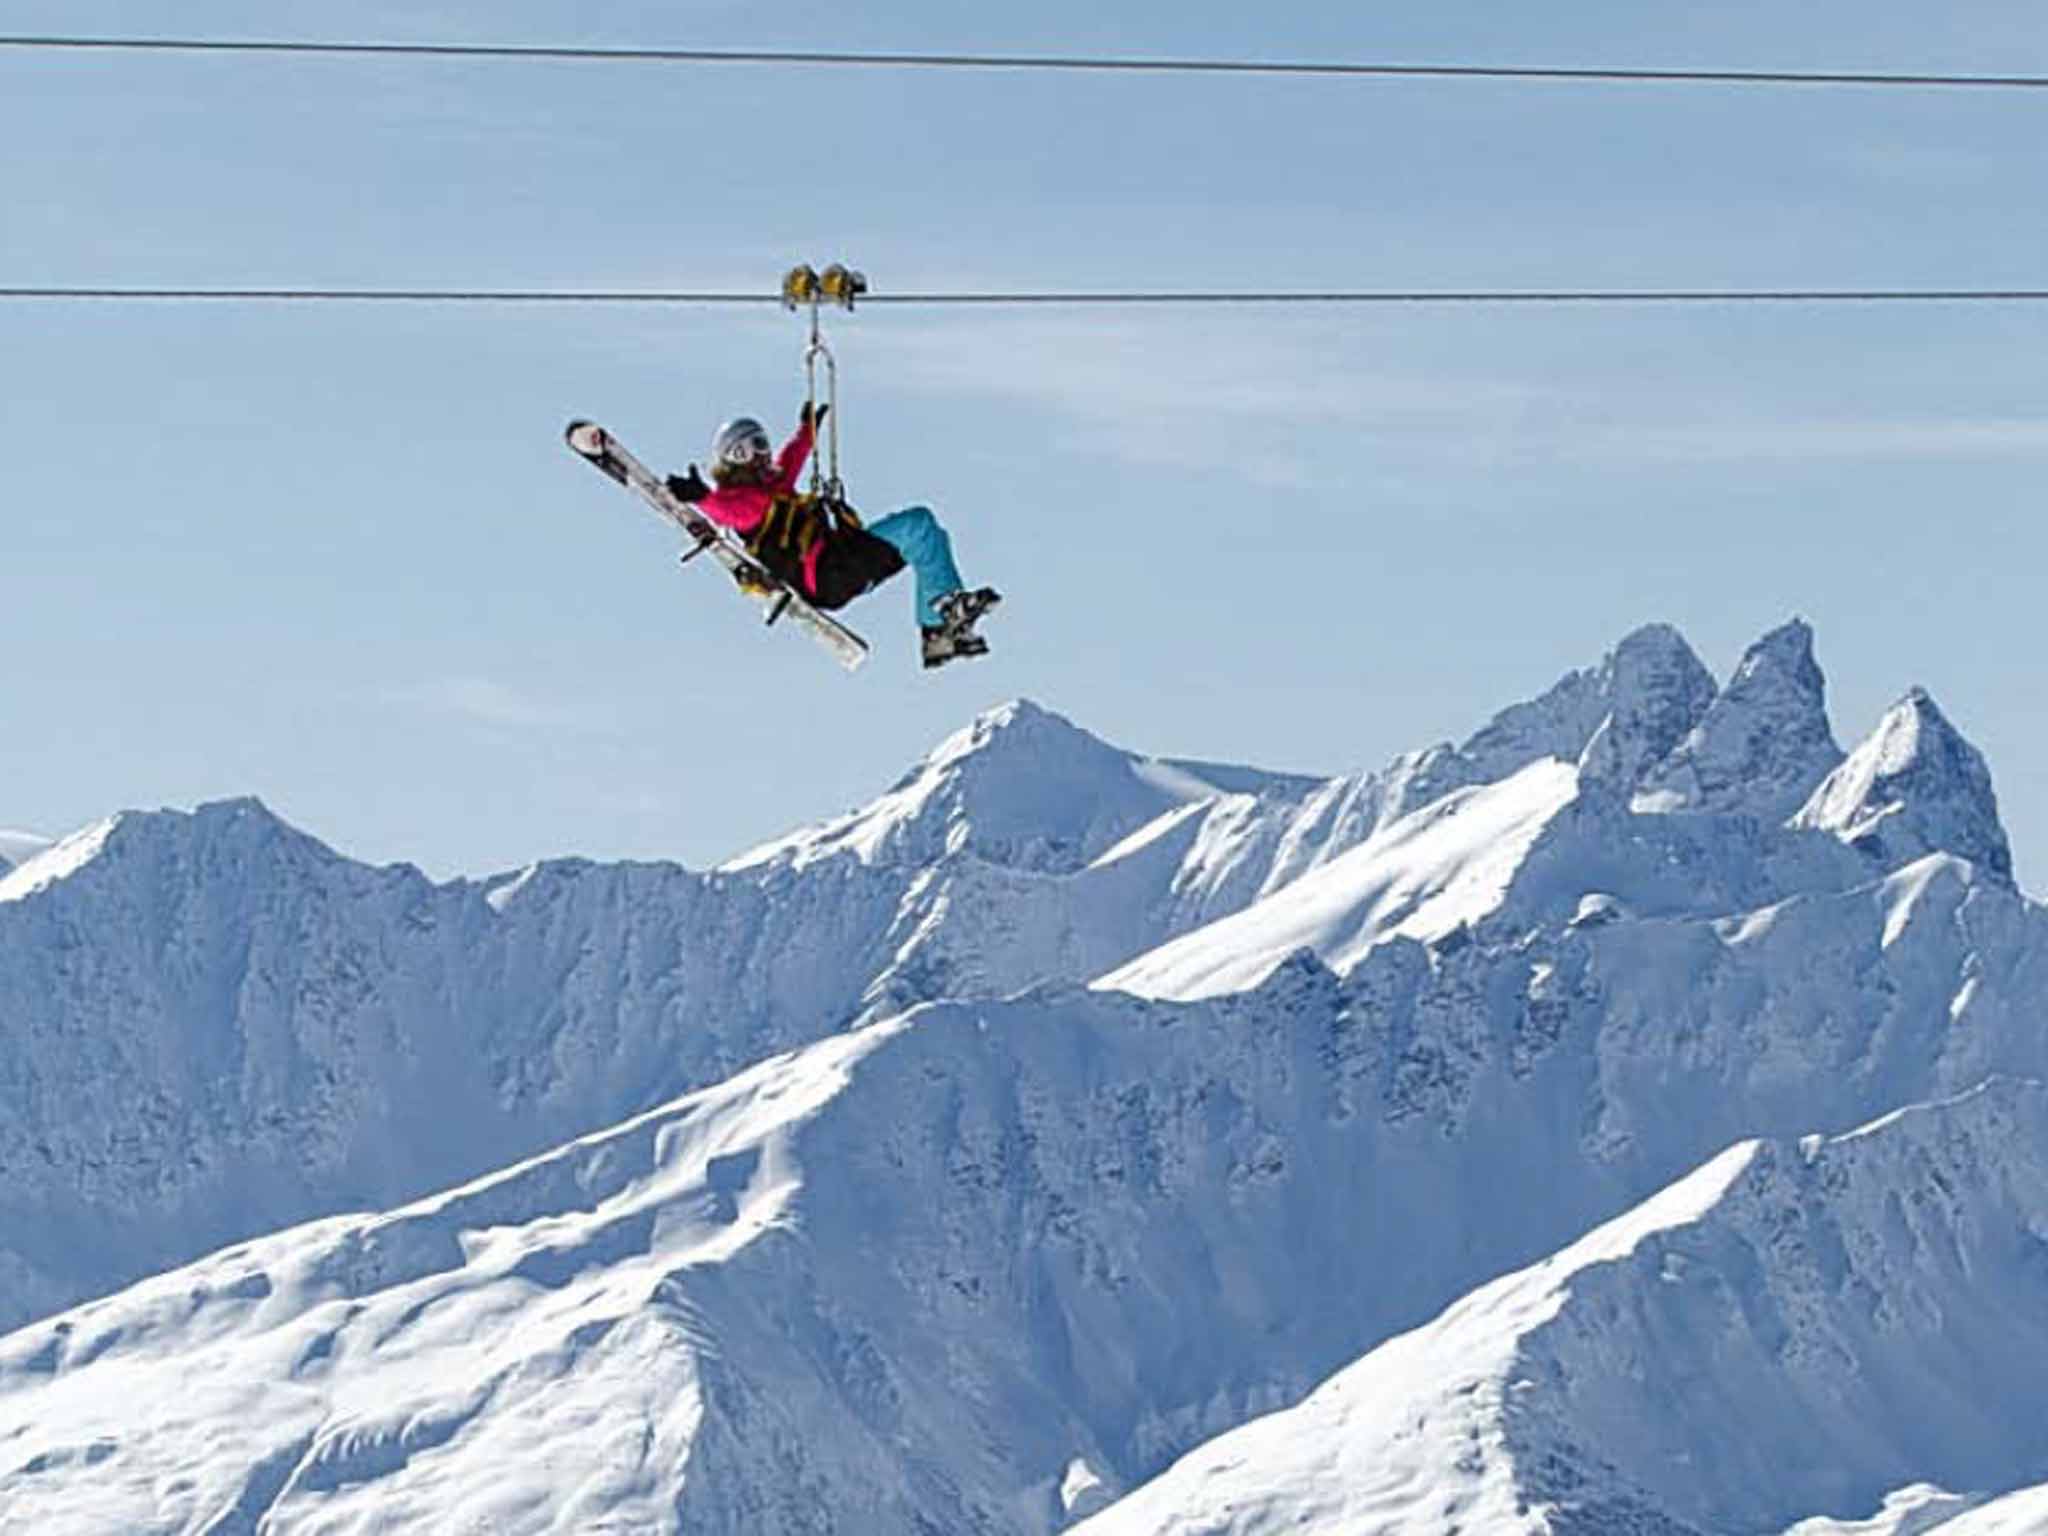 The world's highest zip wire: Val Thorens, France